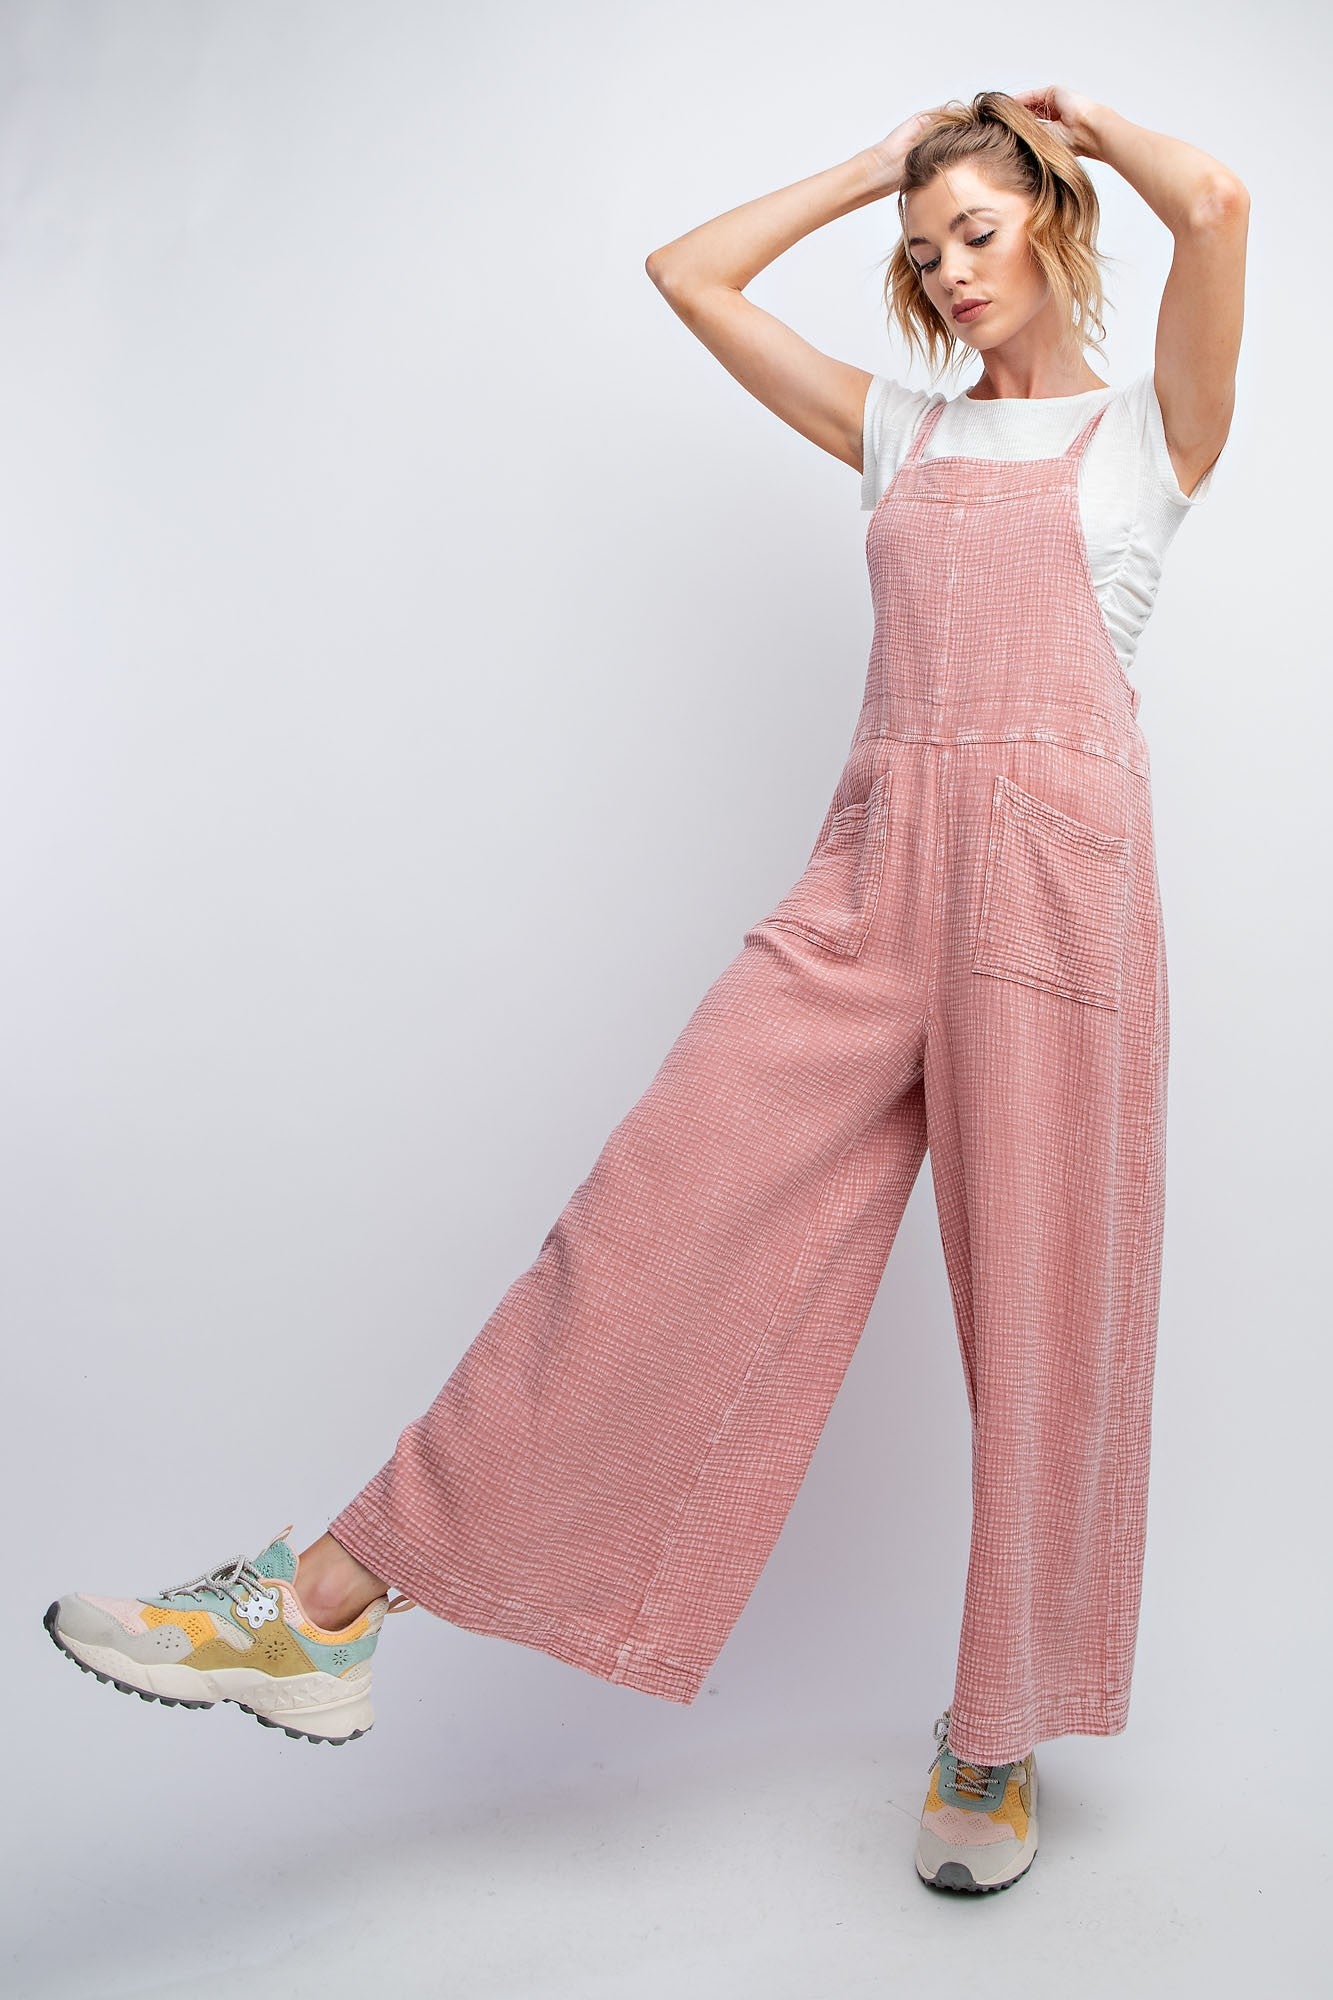 The Petunia Pink Overalls